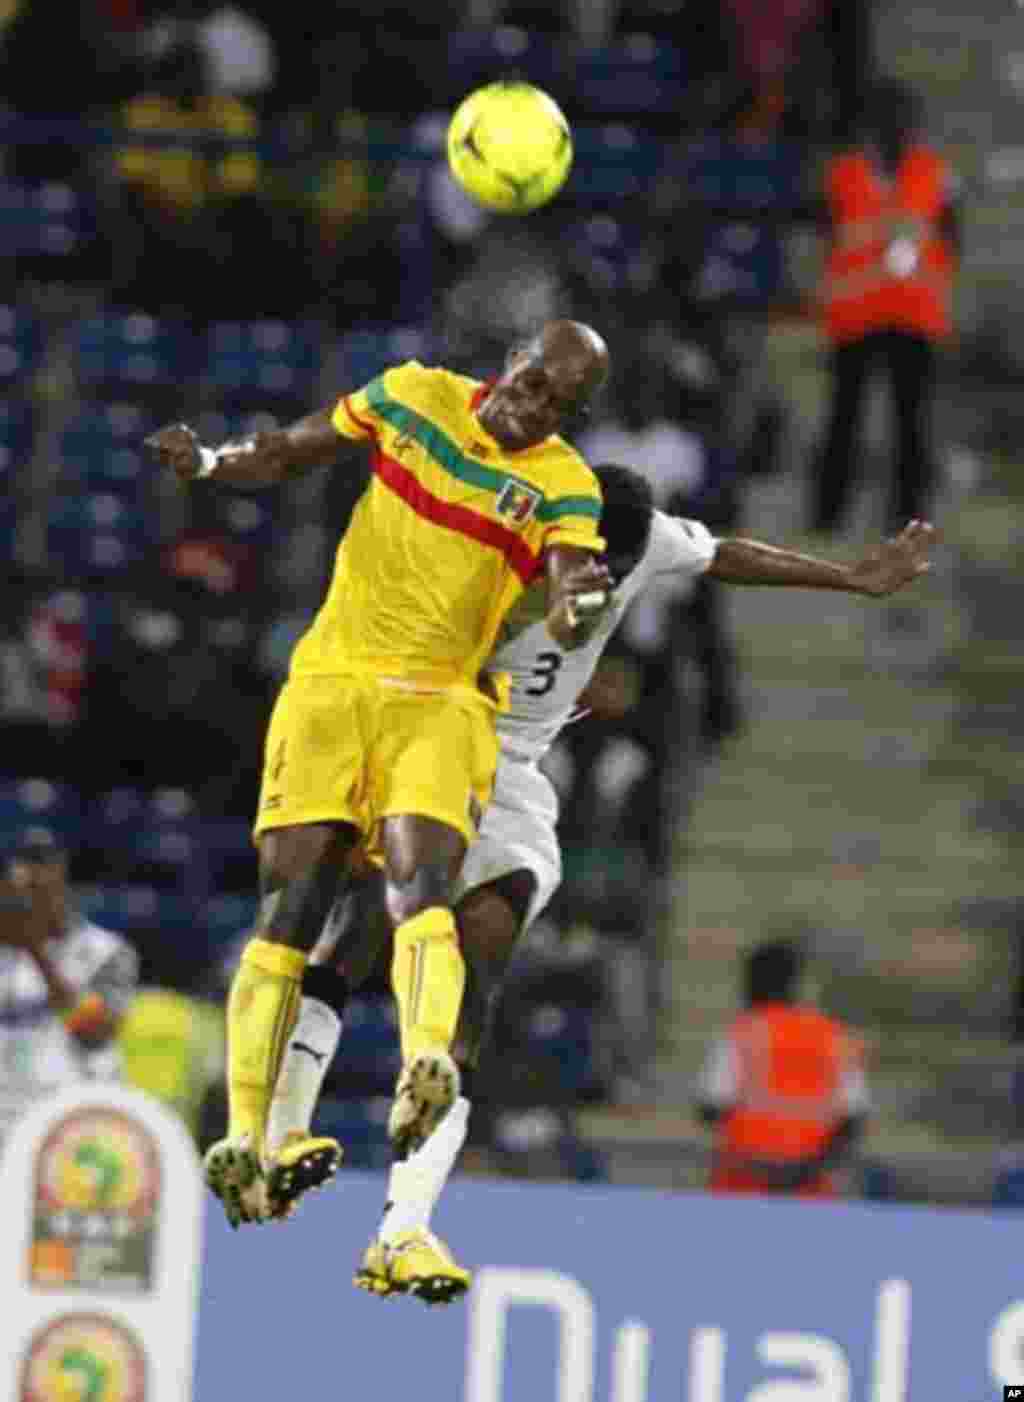 Mali's Berthe Abdoulaye Youssef (L) challenges Gyan Asamoah of Ghana during their African Cup of Nations Group D soccer match in FranceVille Stadium January 28, 2012.